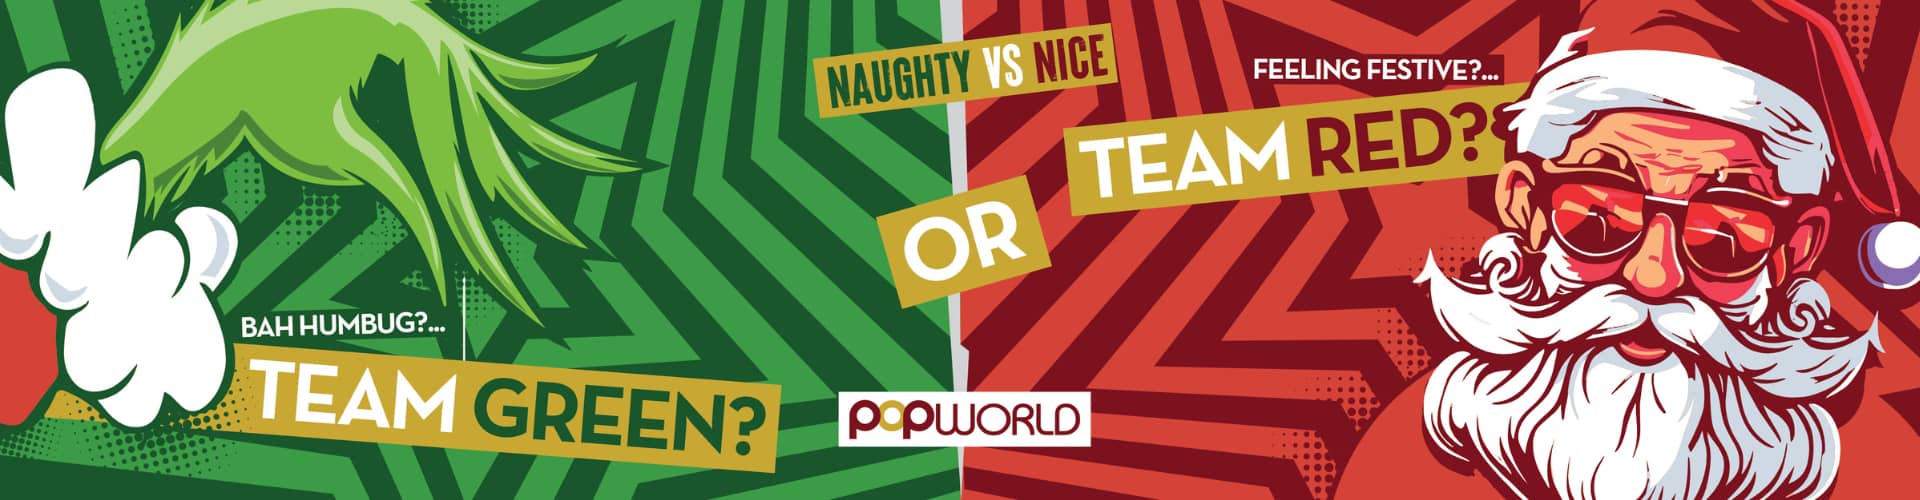 Popworld Liverpool - Naughty vs Nice - Are you Team Green or Team Red?